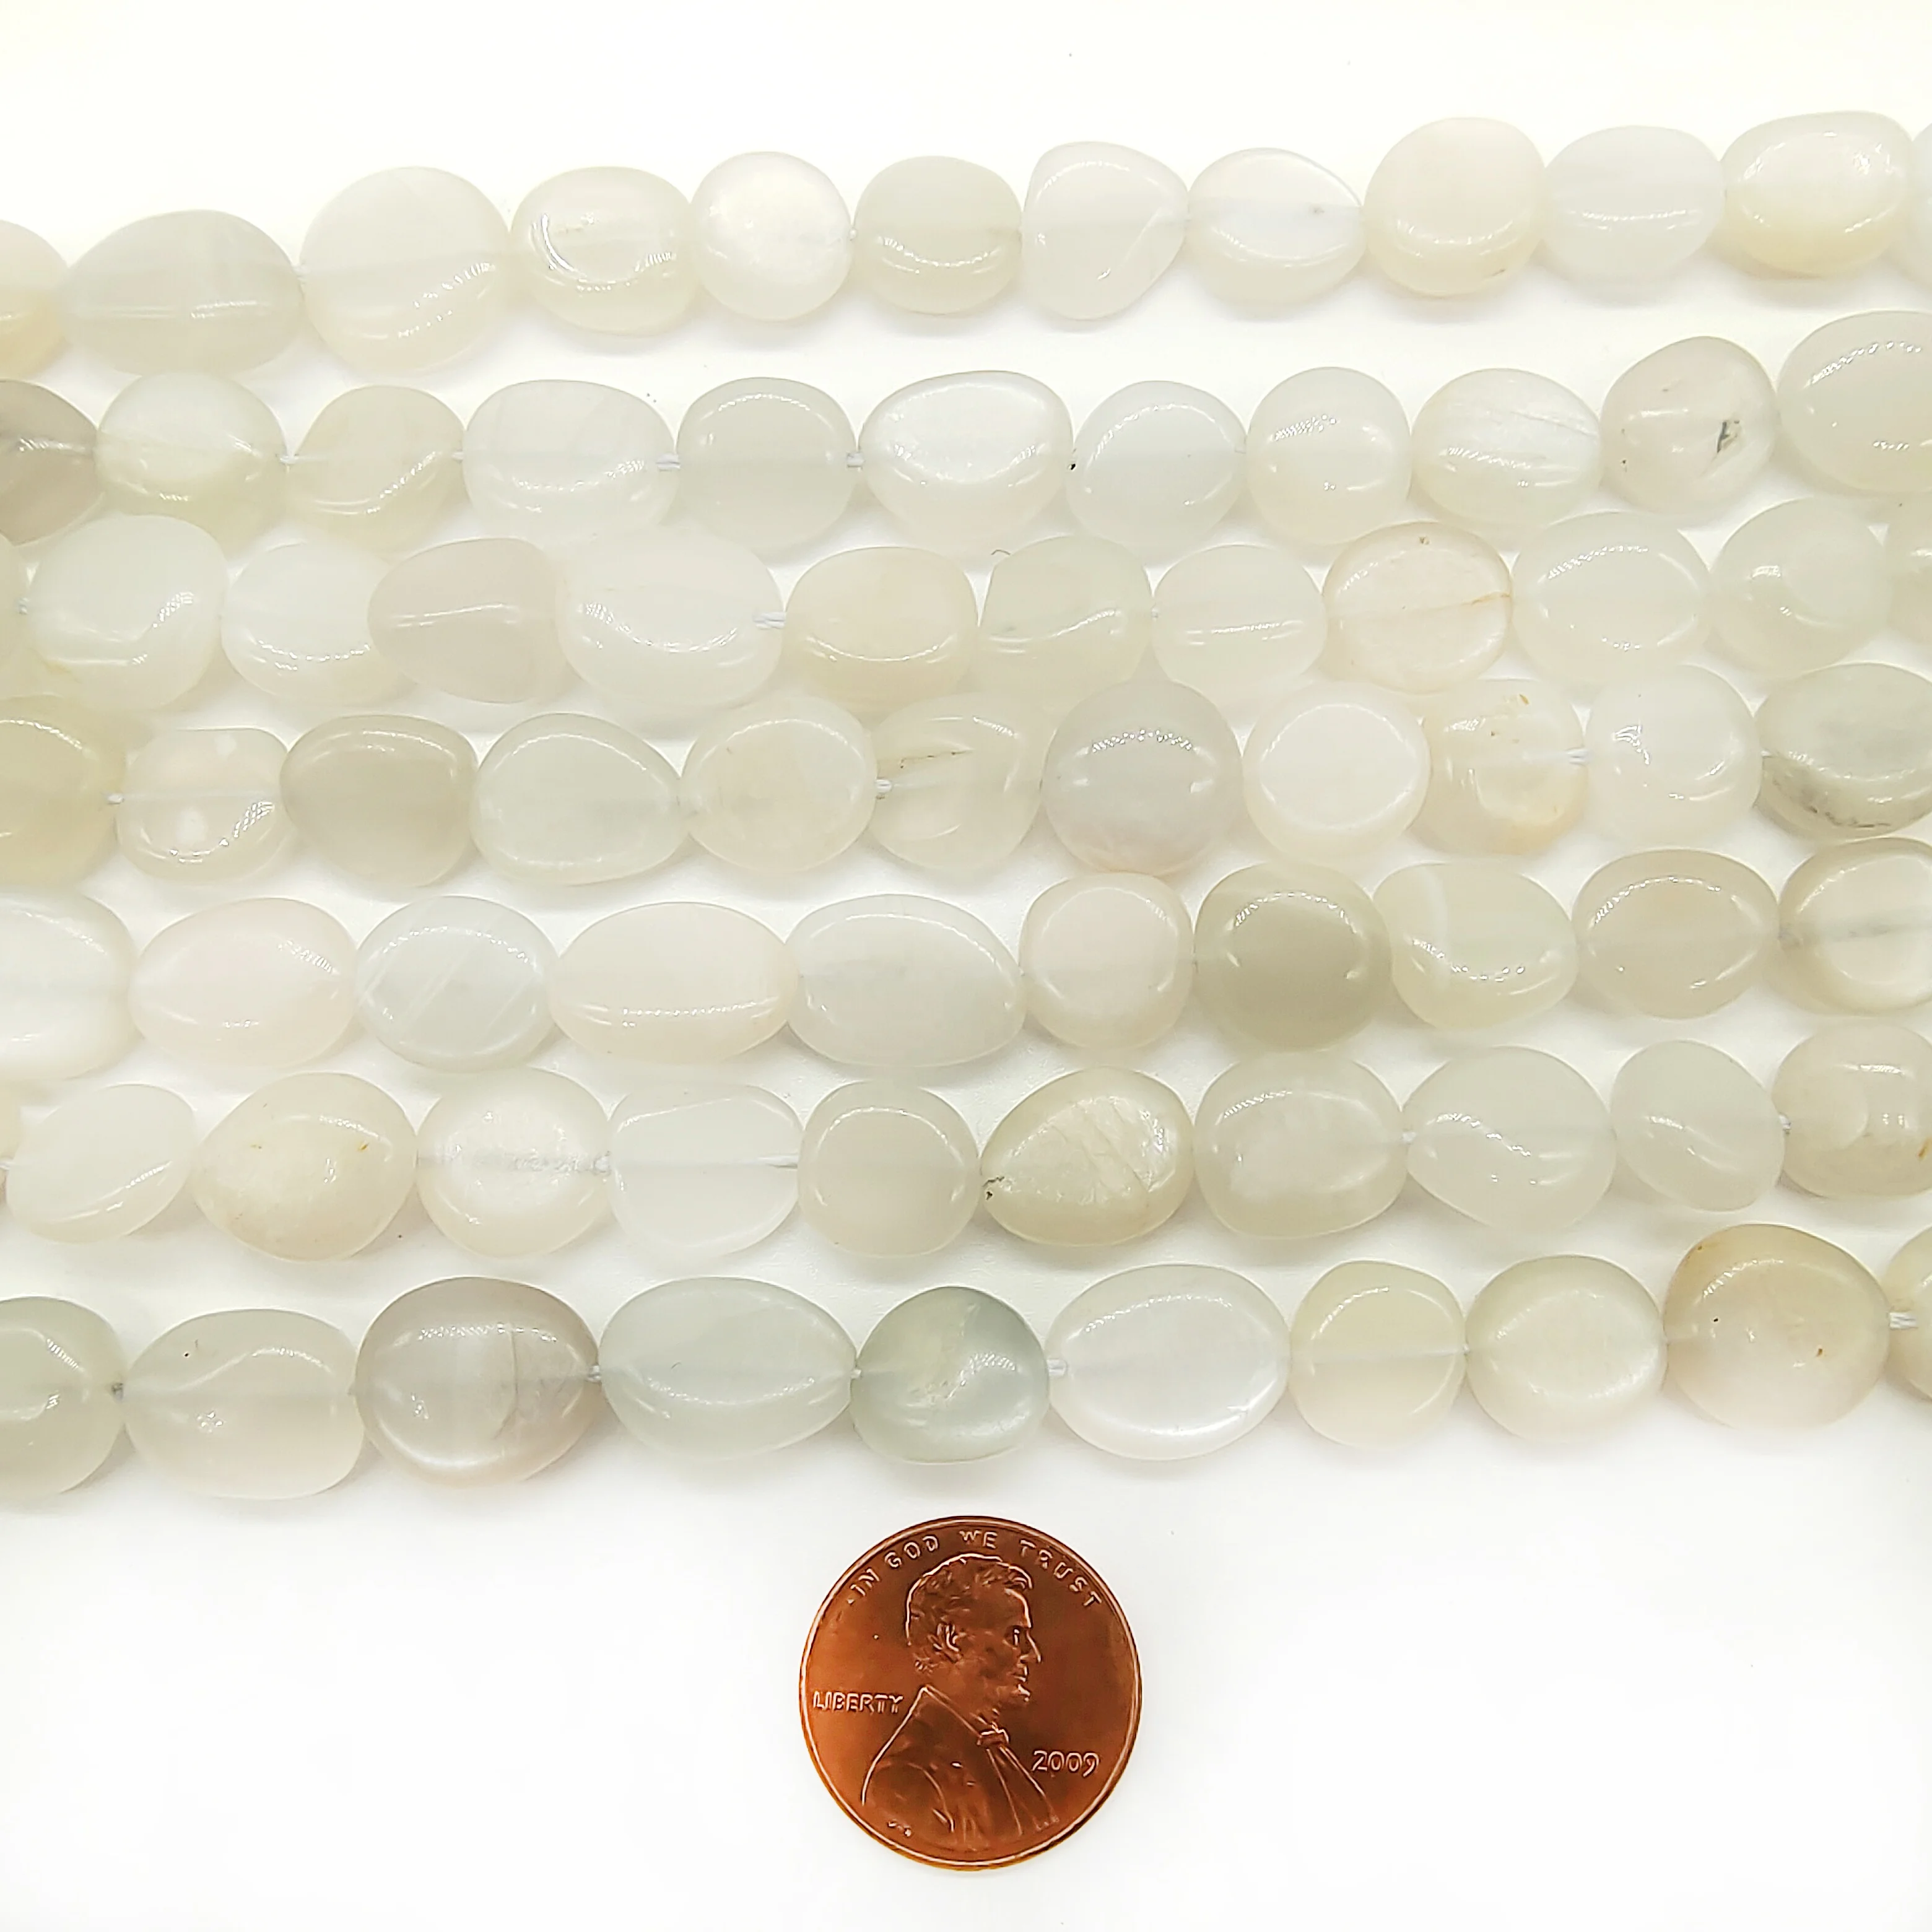 

Natural gemstone wholesale and retail smooth nugget beads freeform unshaped tumble White Moonstone beads, As picture